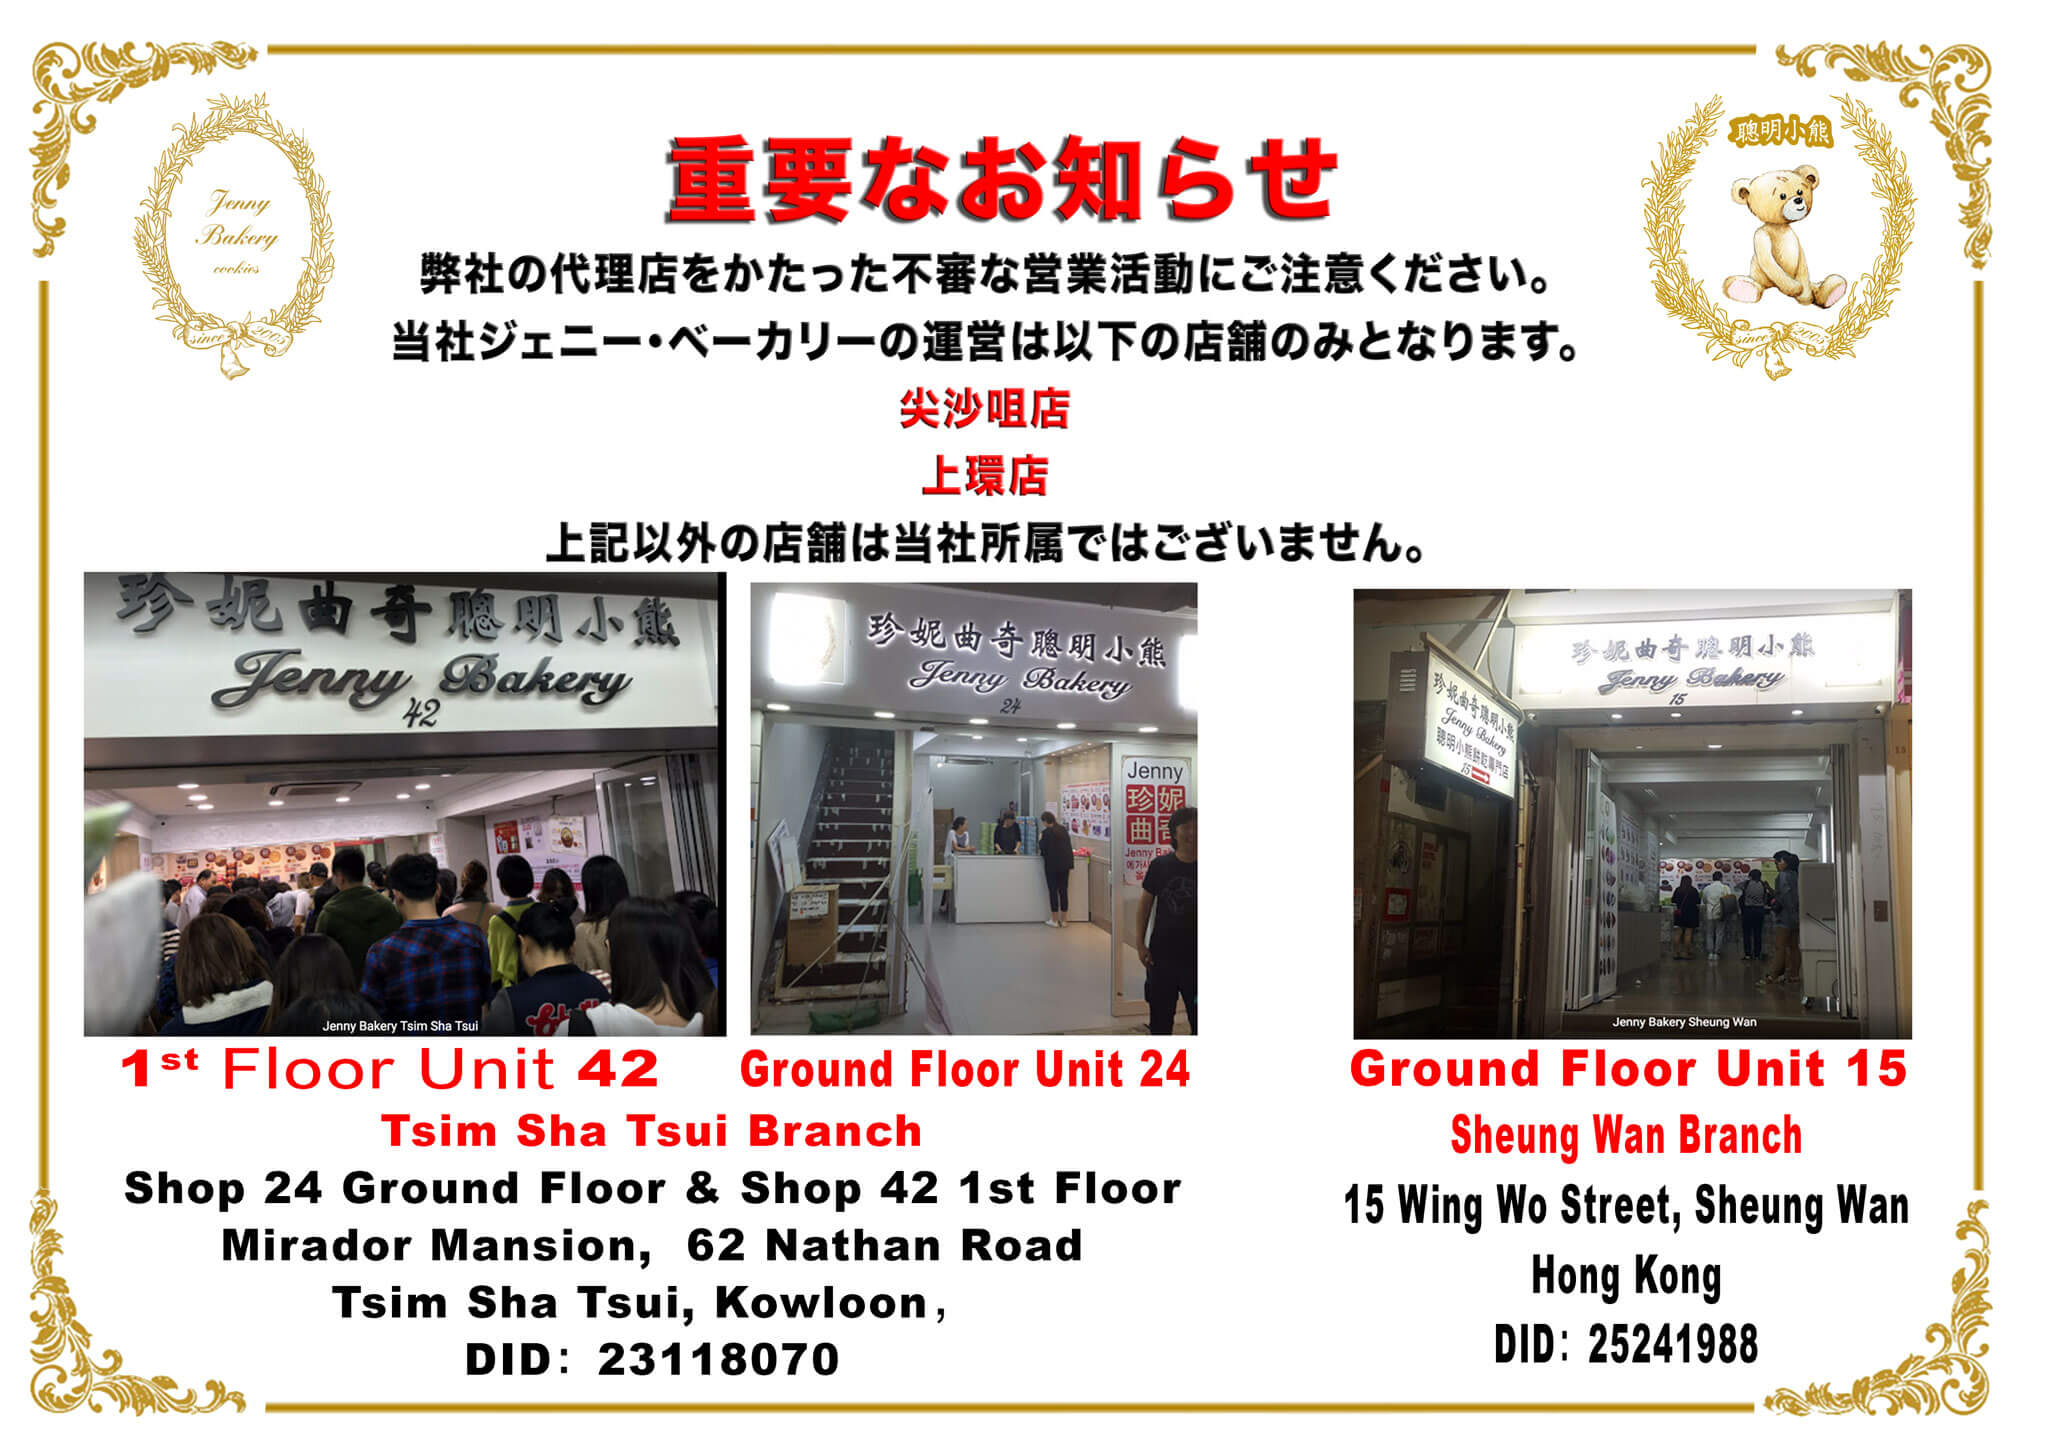 IMPORTANT NOTICE Jenny Bakery Jenny Bakery has only 2 branches in Hong Kong. We do not have any authorized resellers or distributors in any other location within Hong Kong.